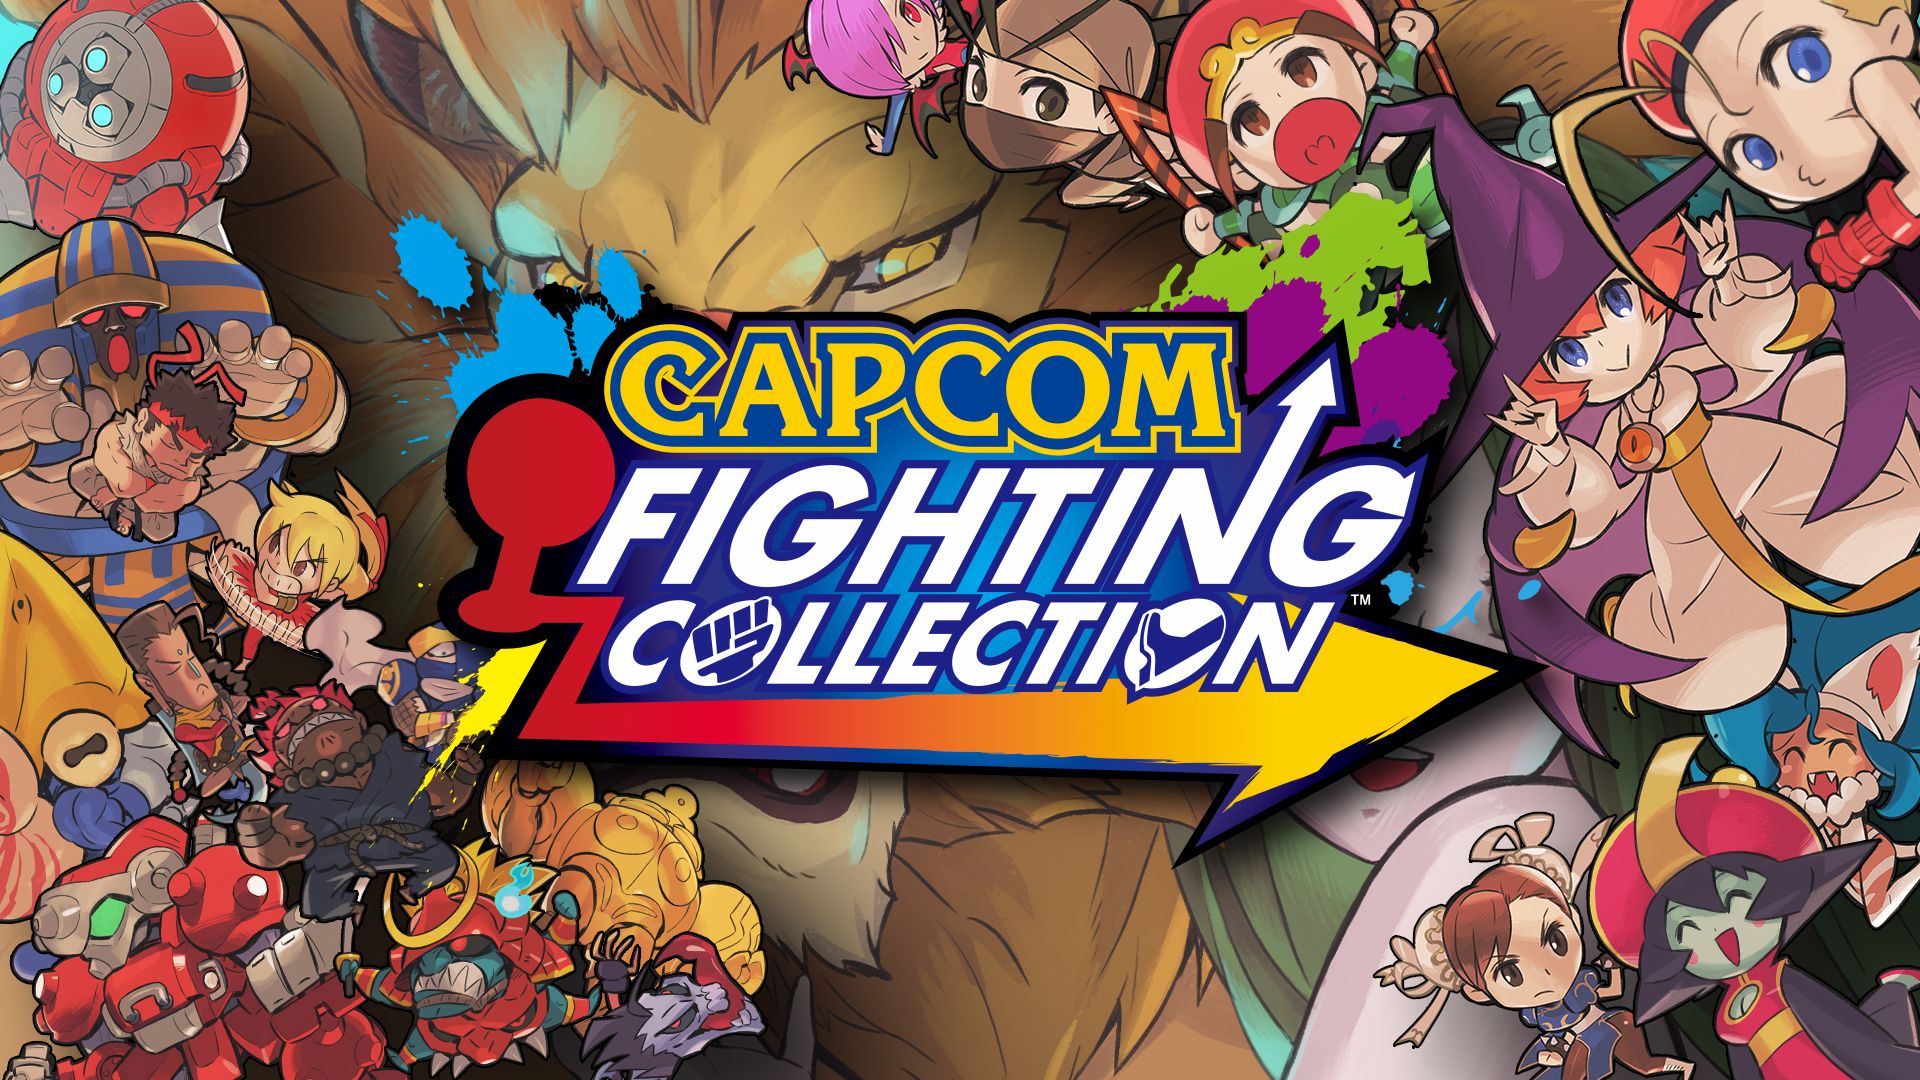 Capcom collection. Capcom Fighting collection. Игра Capcom Fighting collection. Файтинг Нинтендо. Capcom Fighting collection Switch.